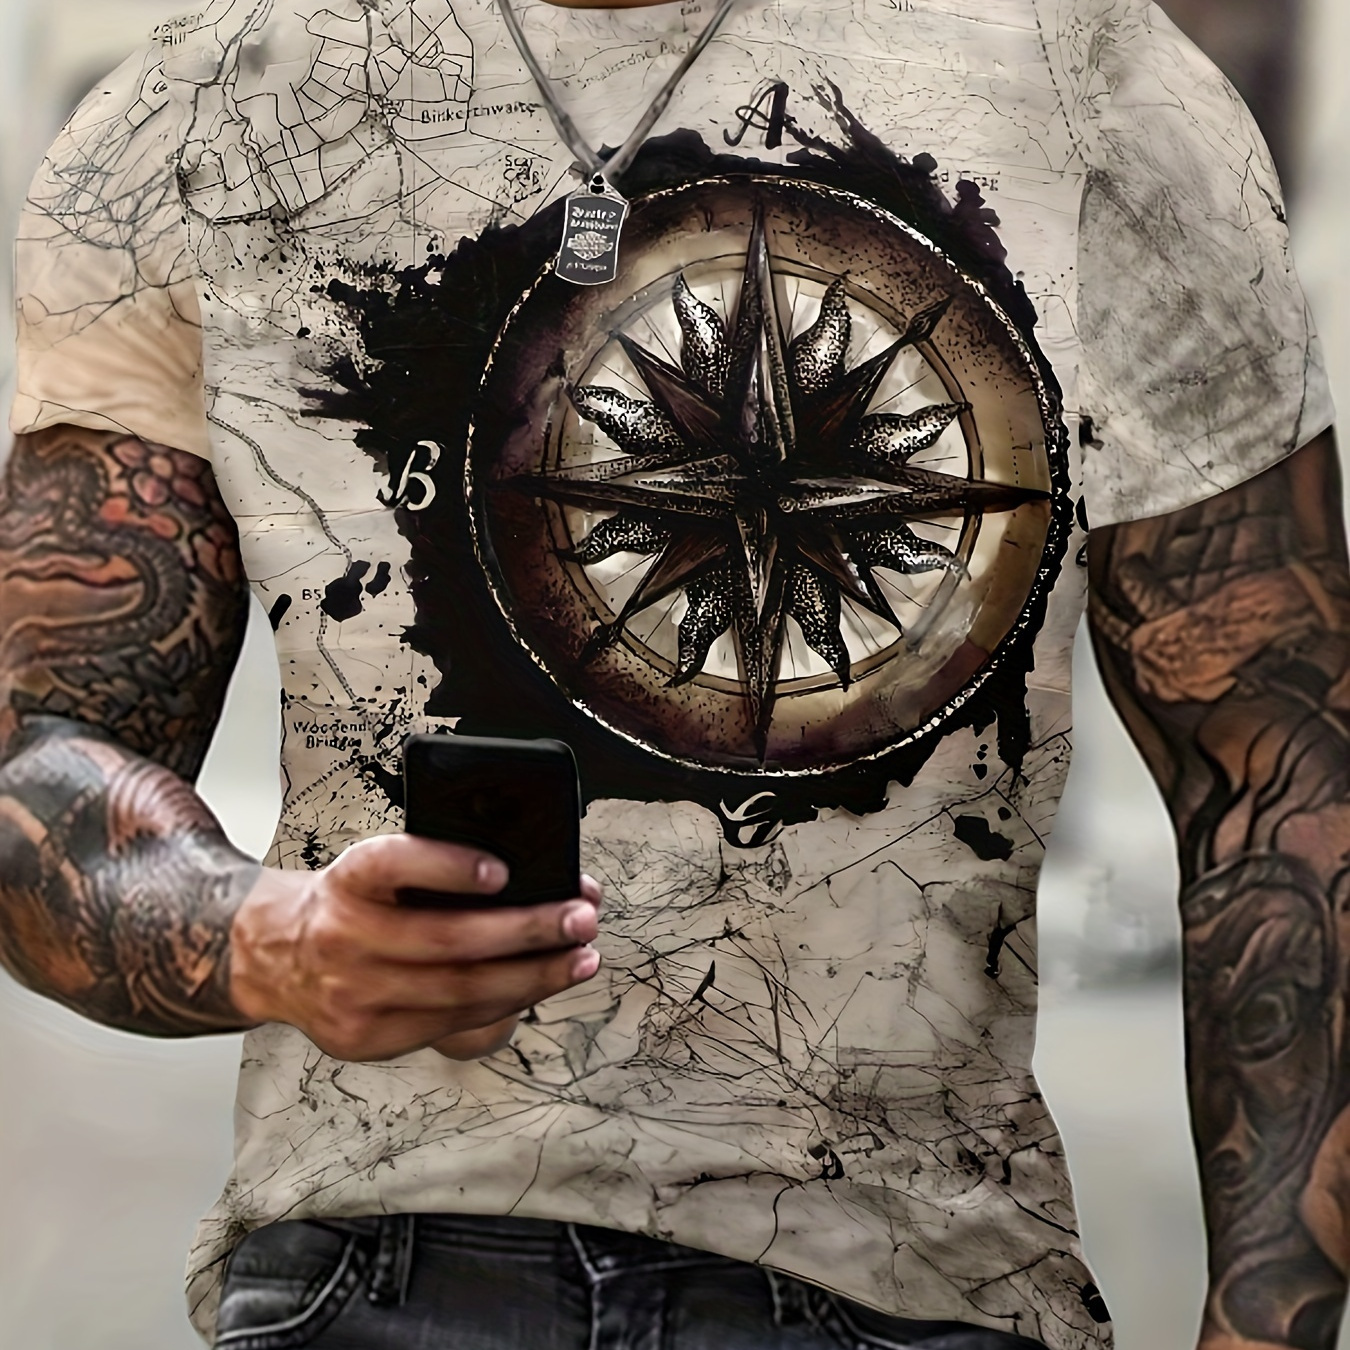 

Vintage Compass Pattern 3d Printed Crew Neck Short Sleeve T-shirt For Men, Casual Summer T-shirt For Daily Wear And Vacation Resorts